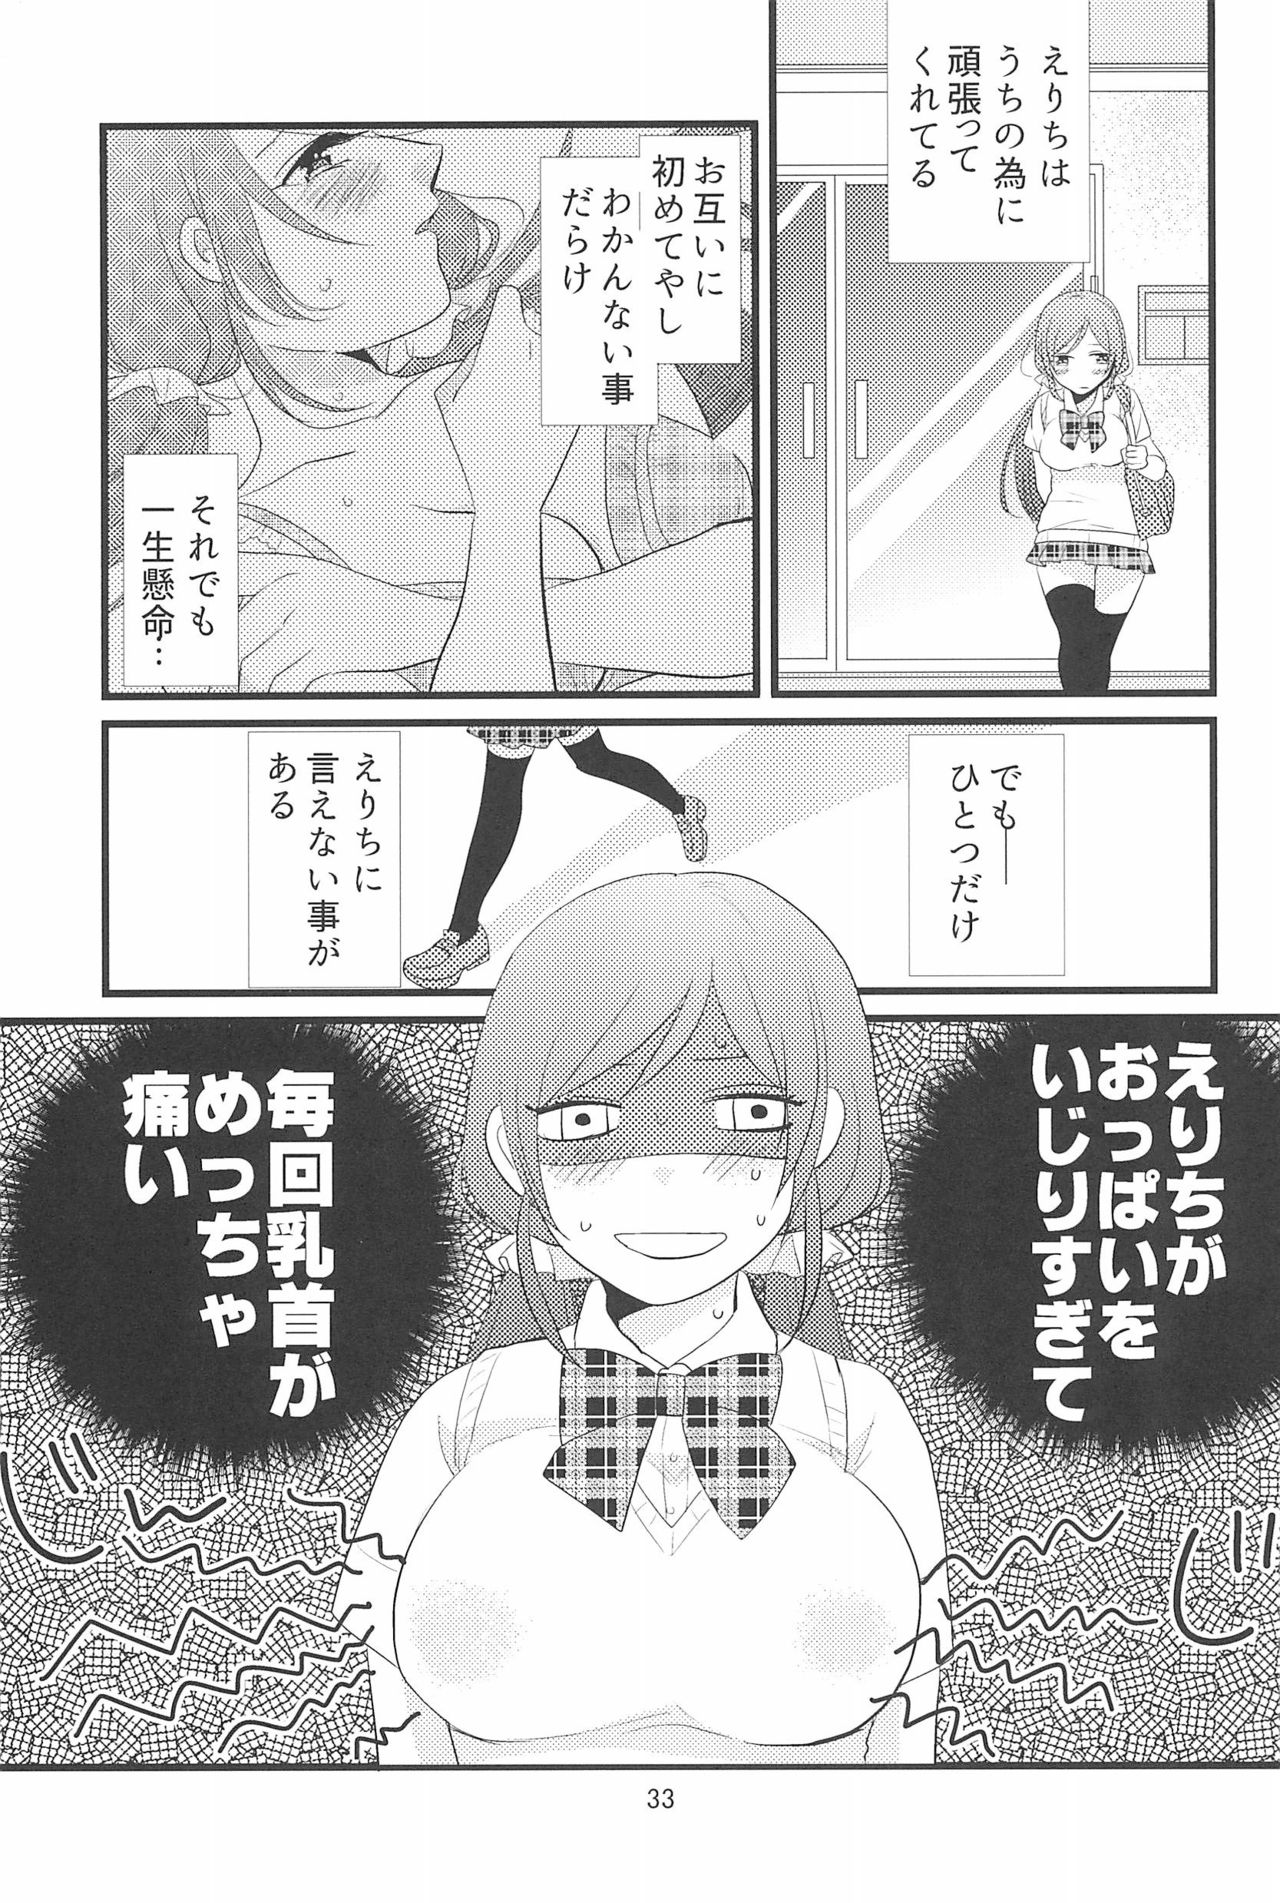 (C90) [BK*N2 (Mikawa Miso)] HAPPY GO LUCKY DAYS (Love Live!) page 37 full